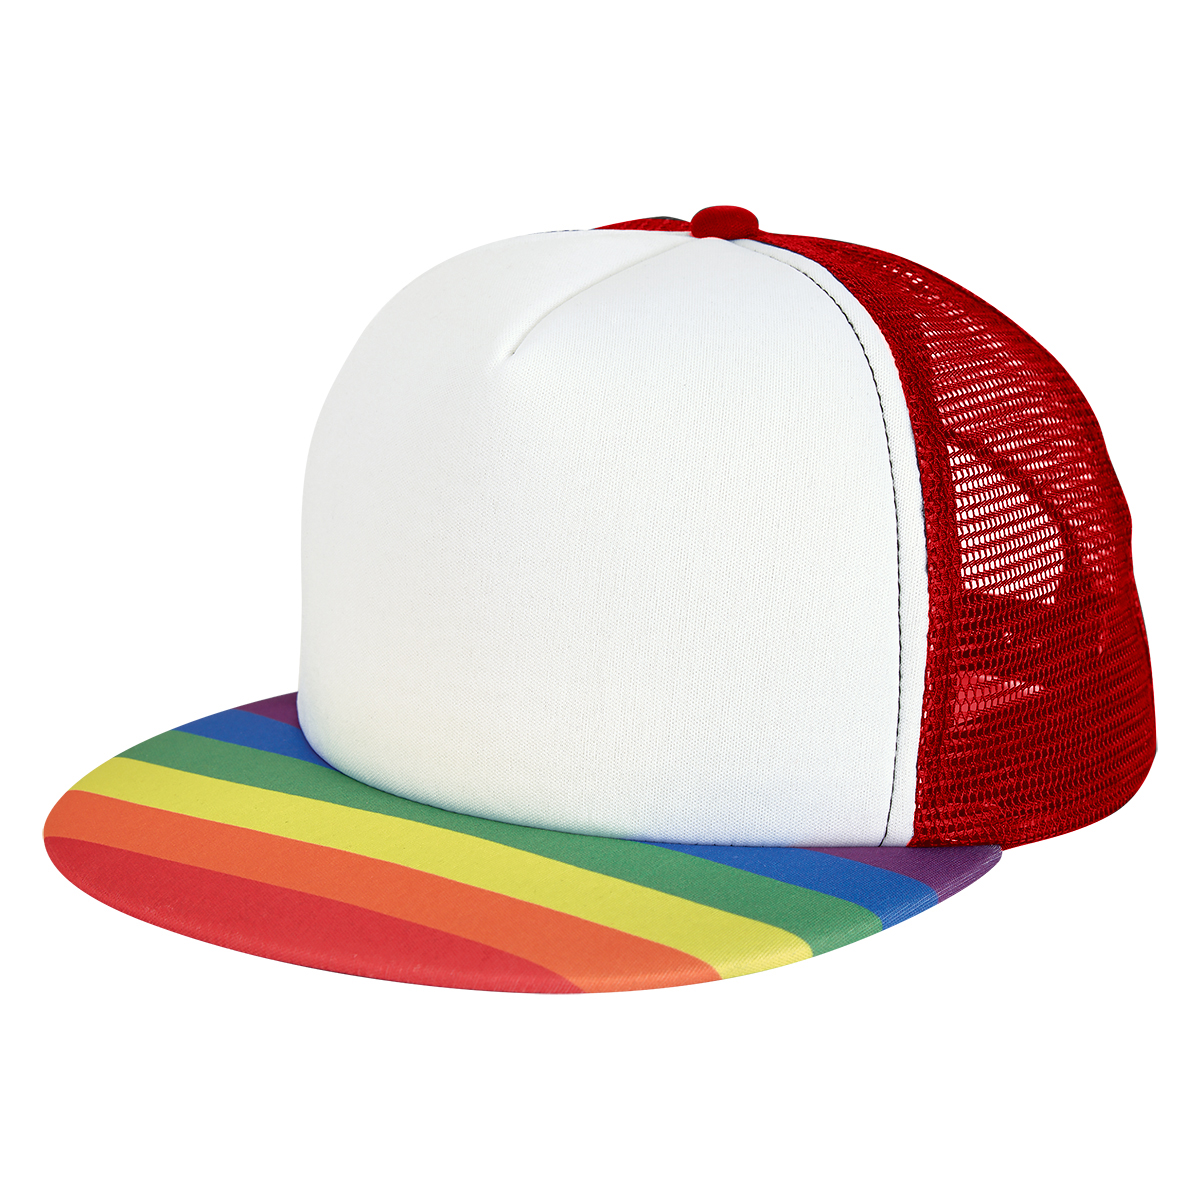 #1082 Rainbow Trucker Cap - Hit Promotional Products